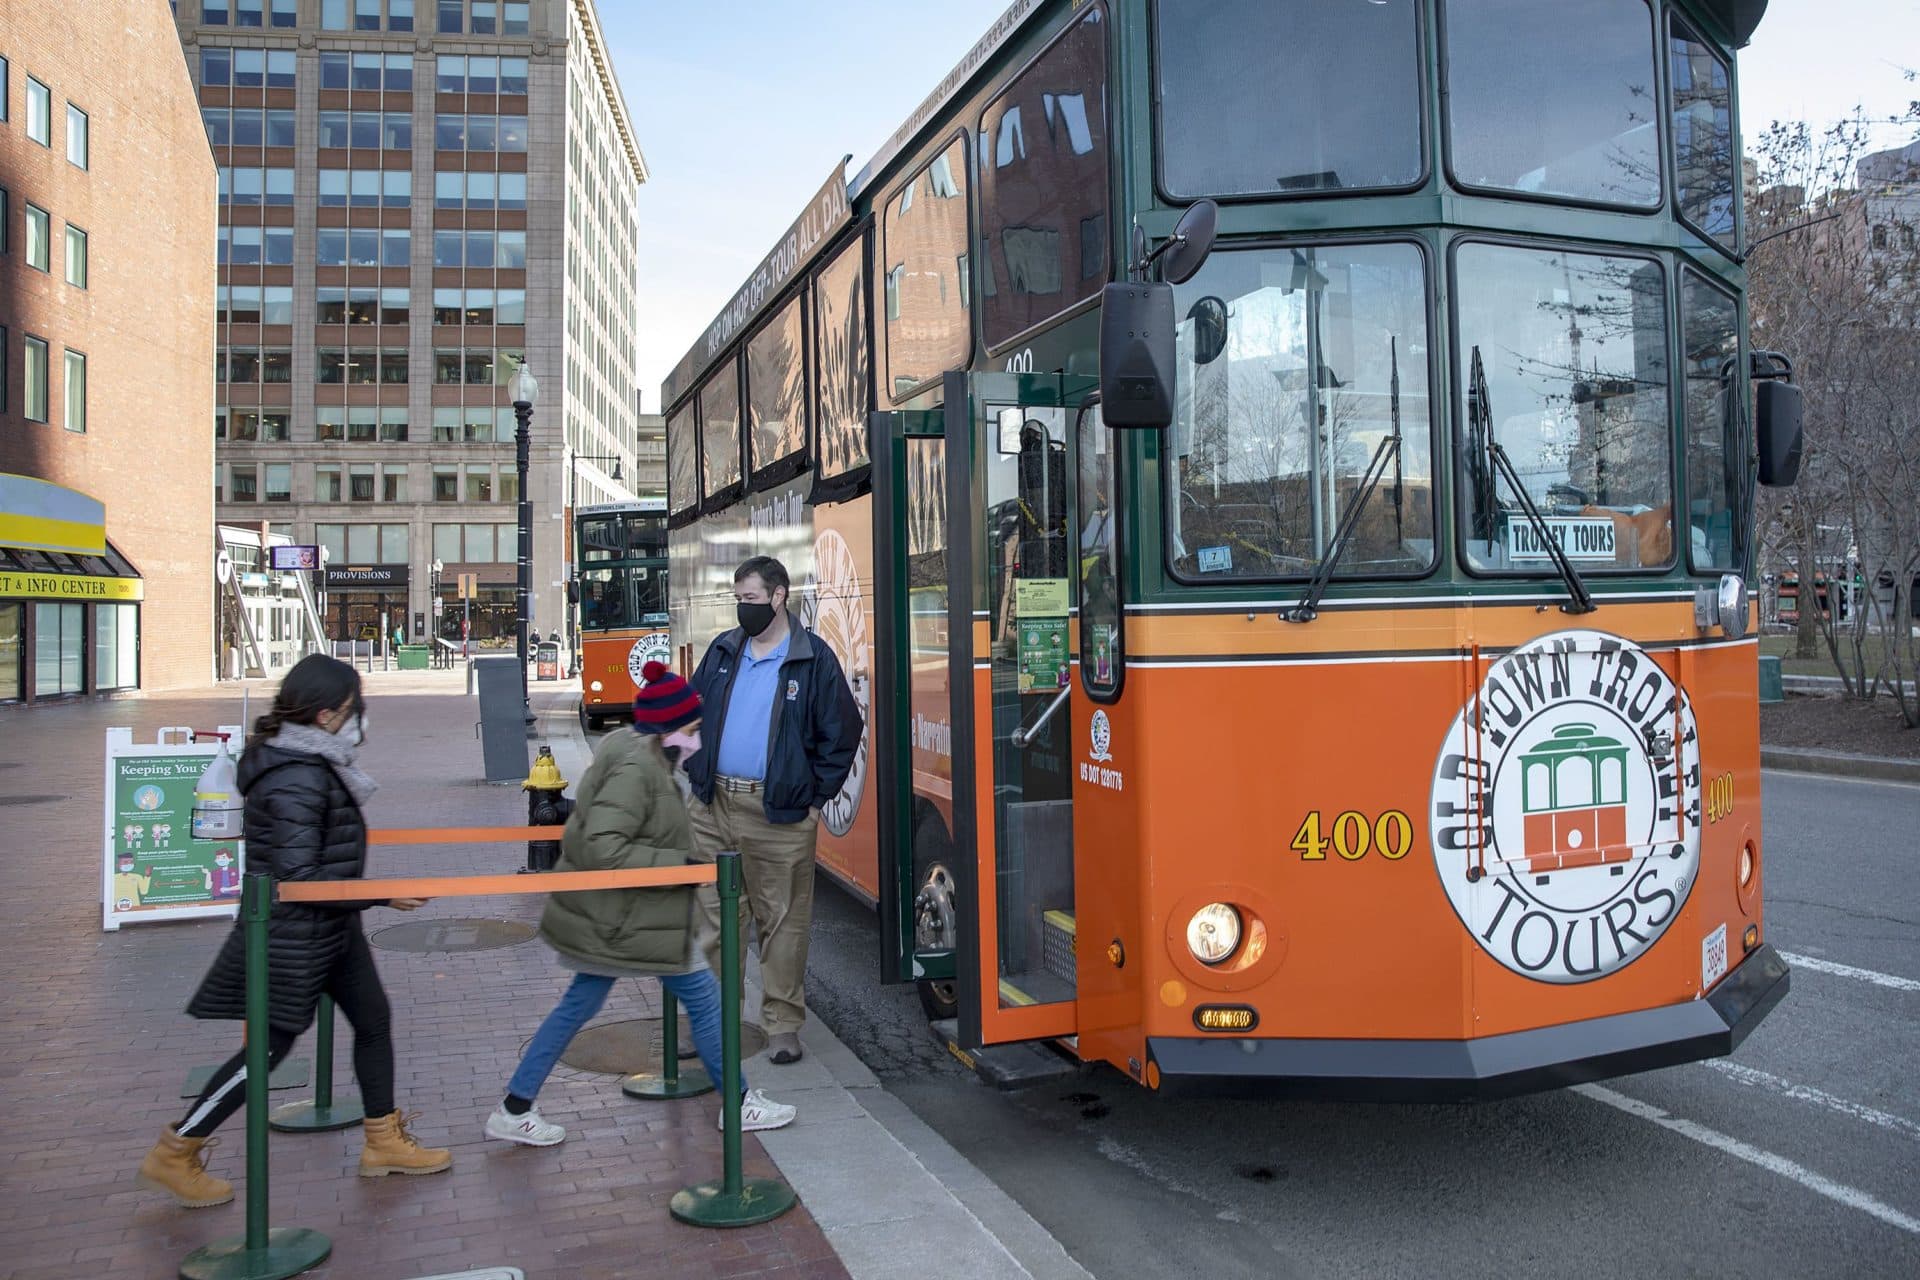 Driver Micheal Long welcomes a couple visitors into his trolley tour. (Robin Lubbock/WBUR)